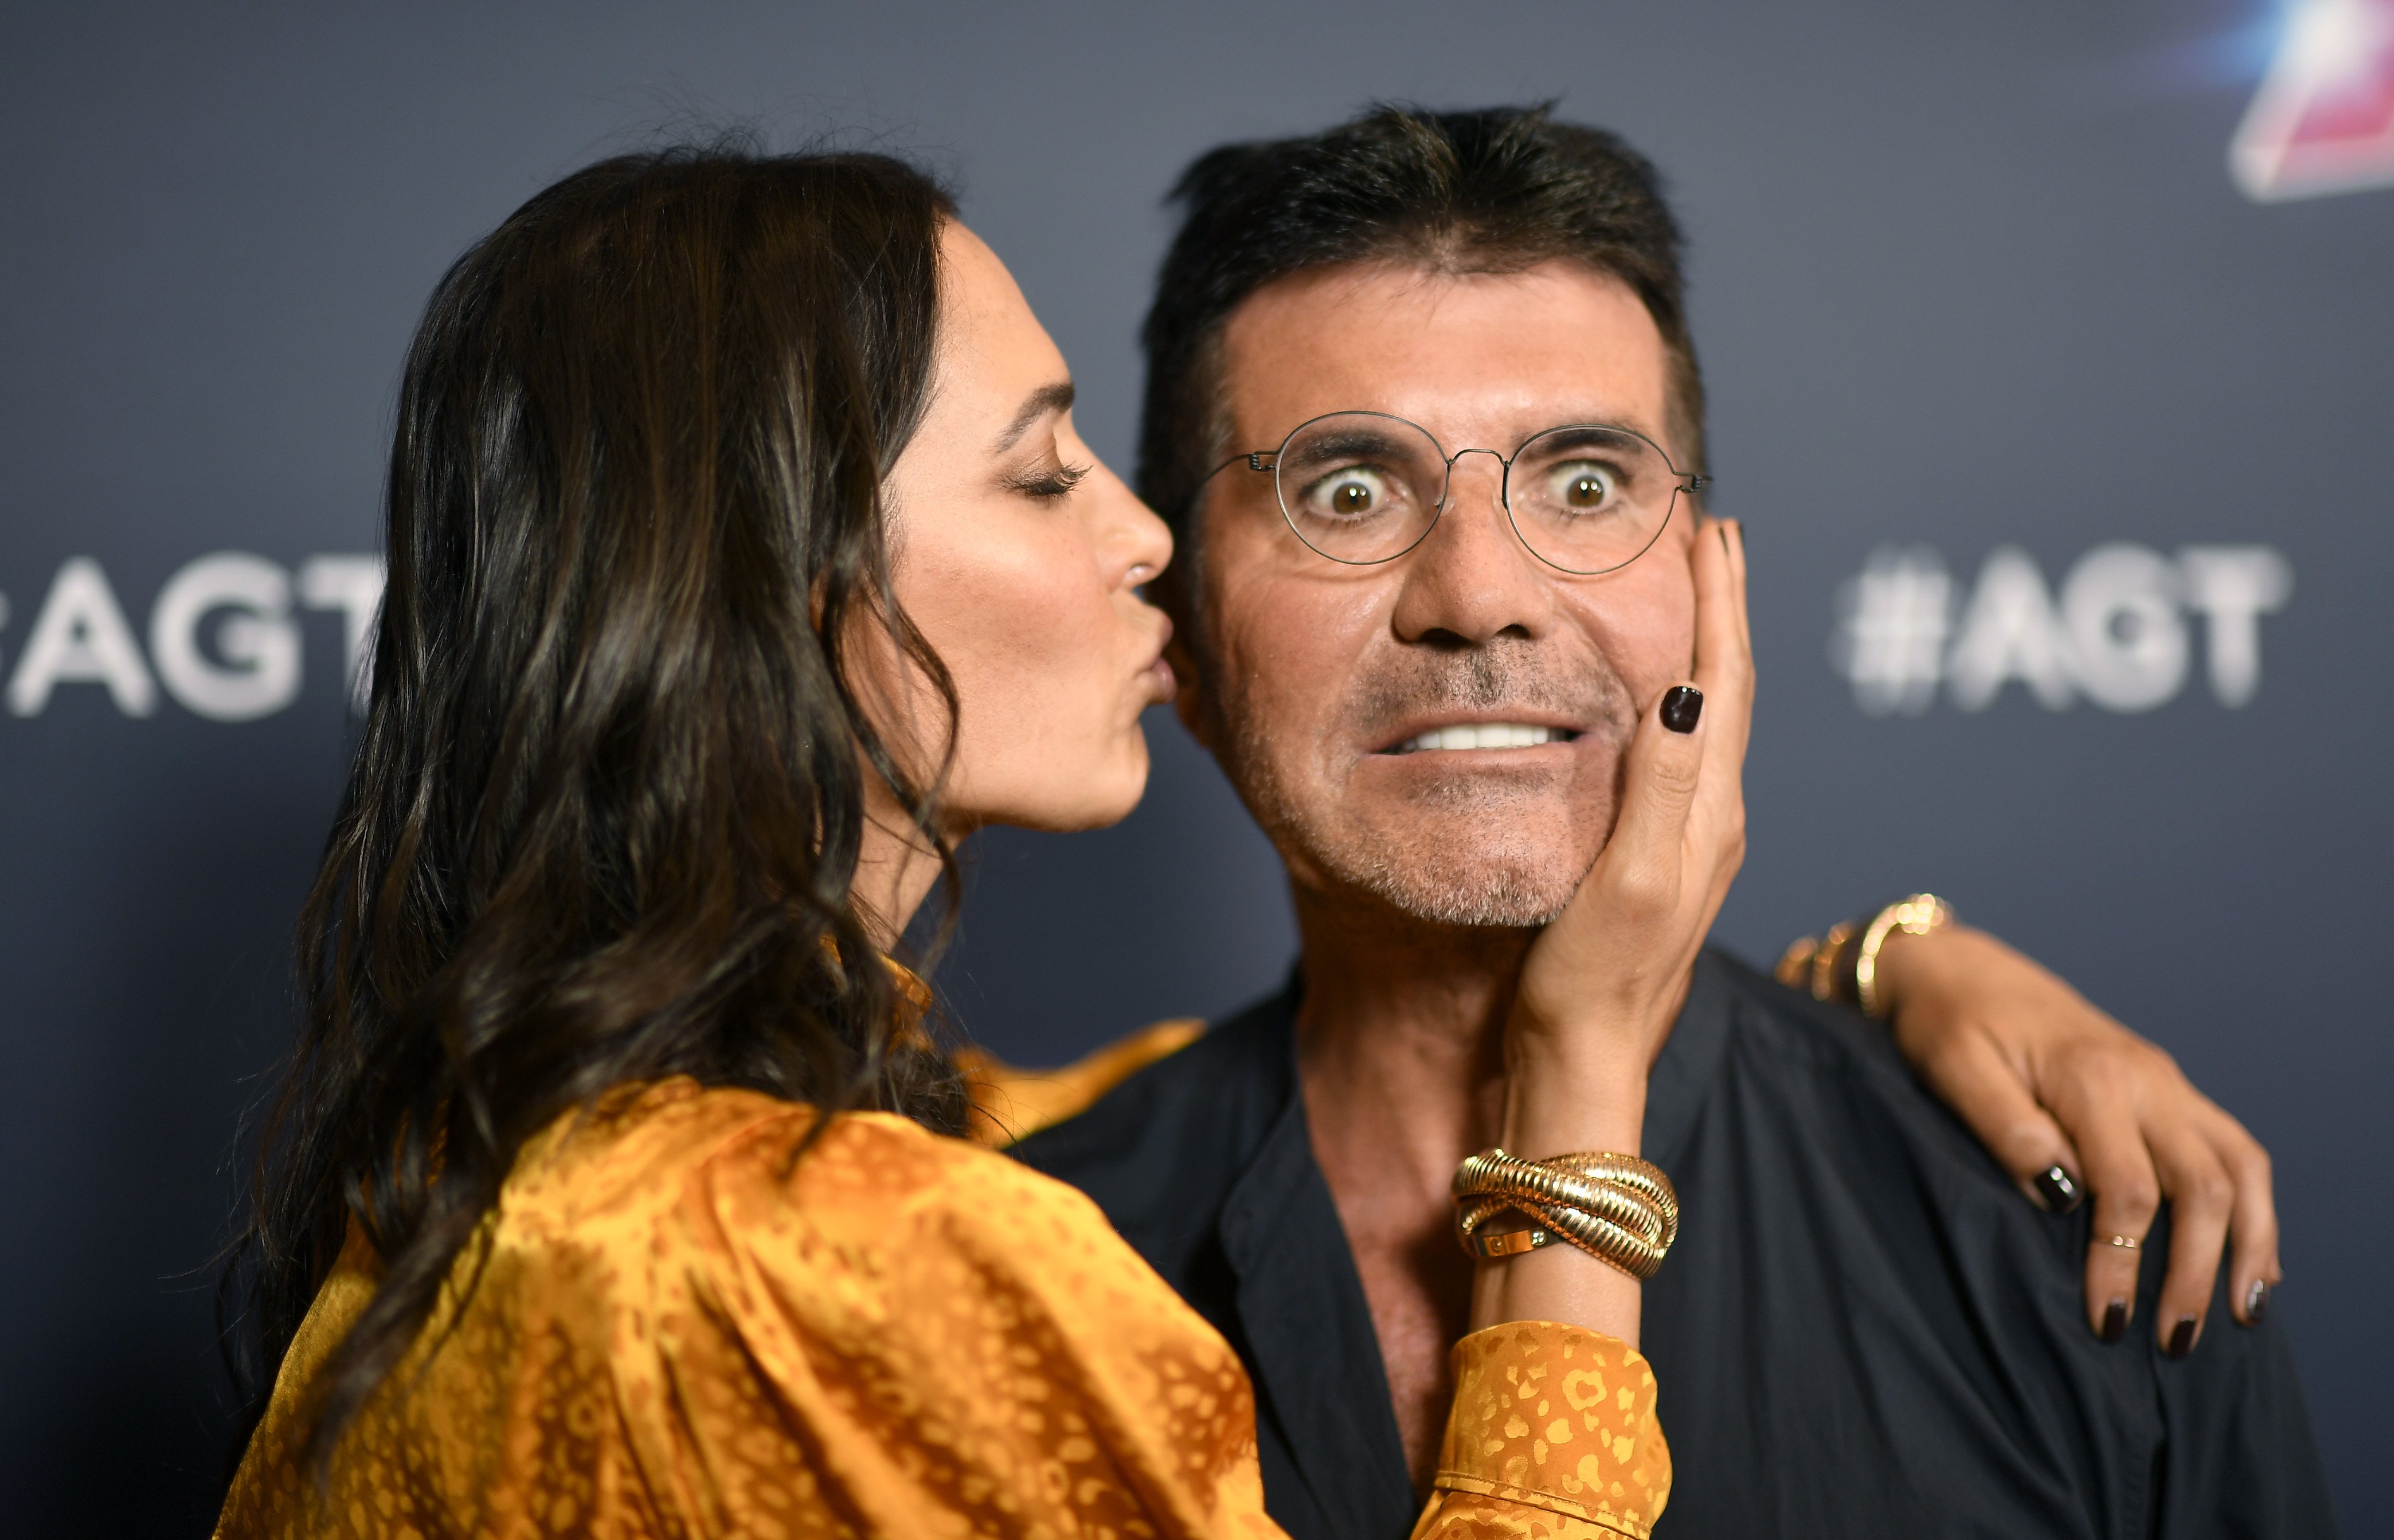 Lauren Silverman and Simon Cowell attends Red Carpet for "America's Got Talent" in Hollywood on September 17, 2019 | Photo: Getty Images